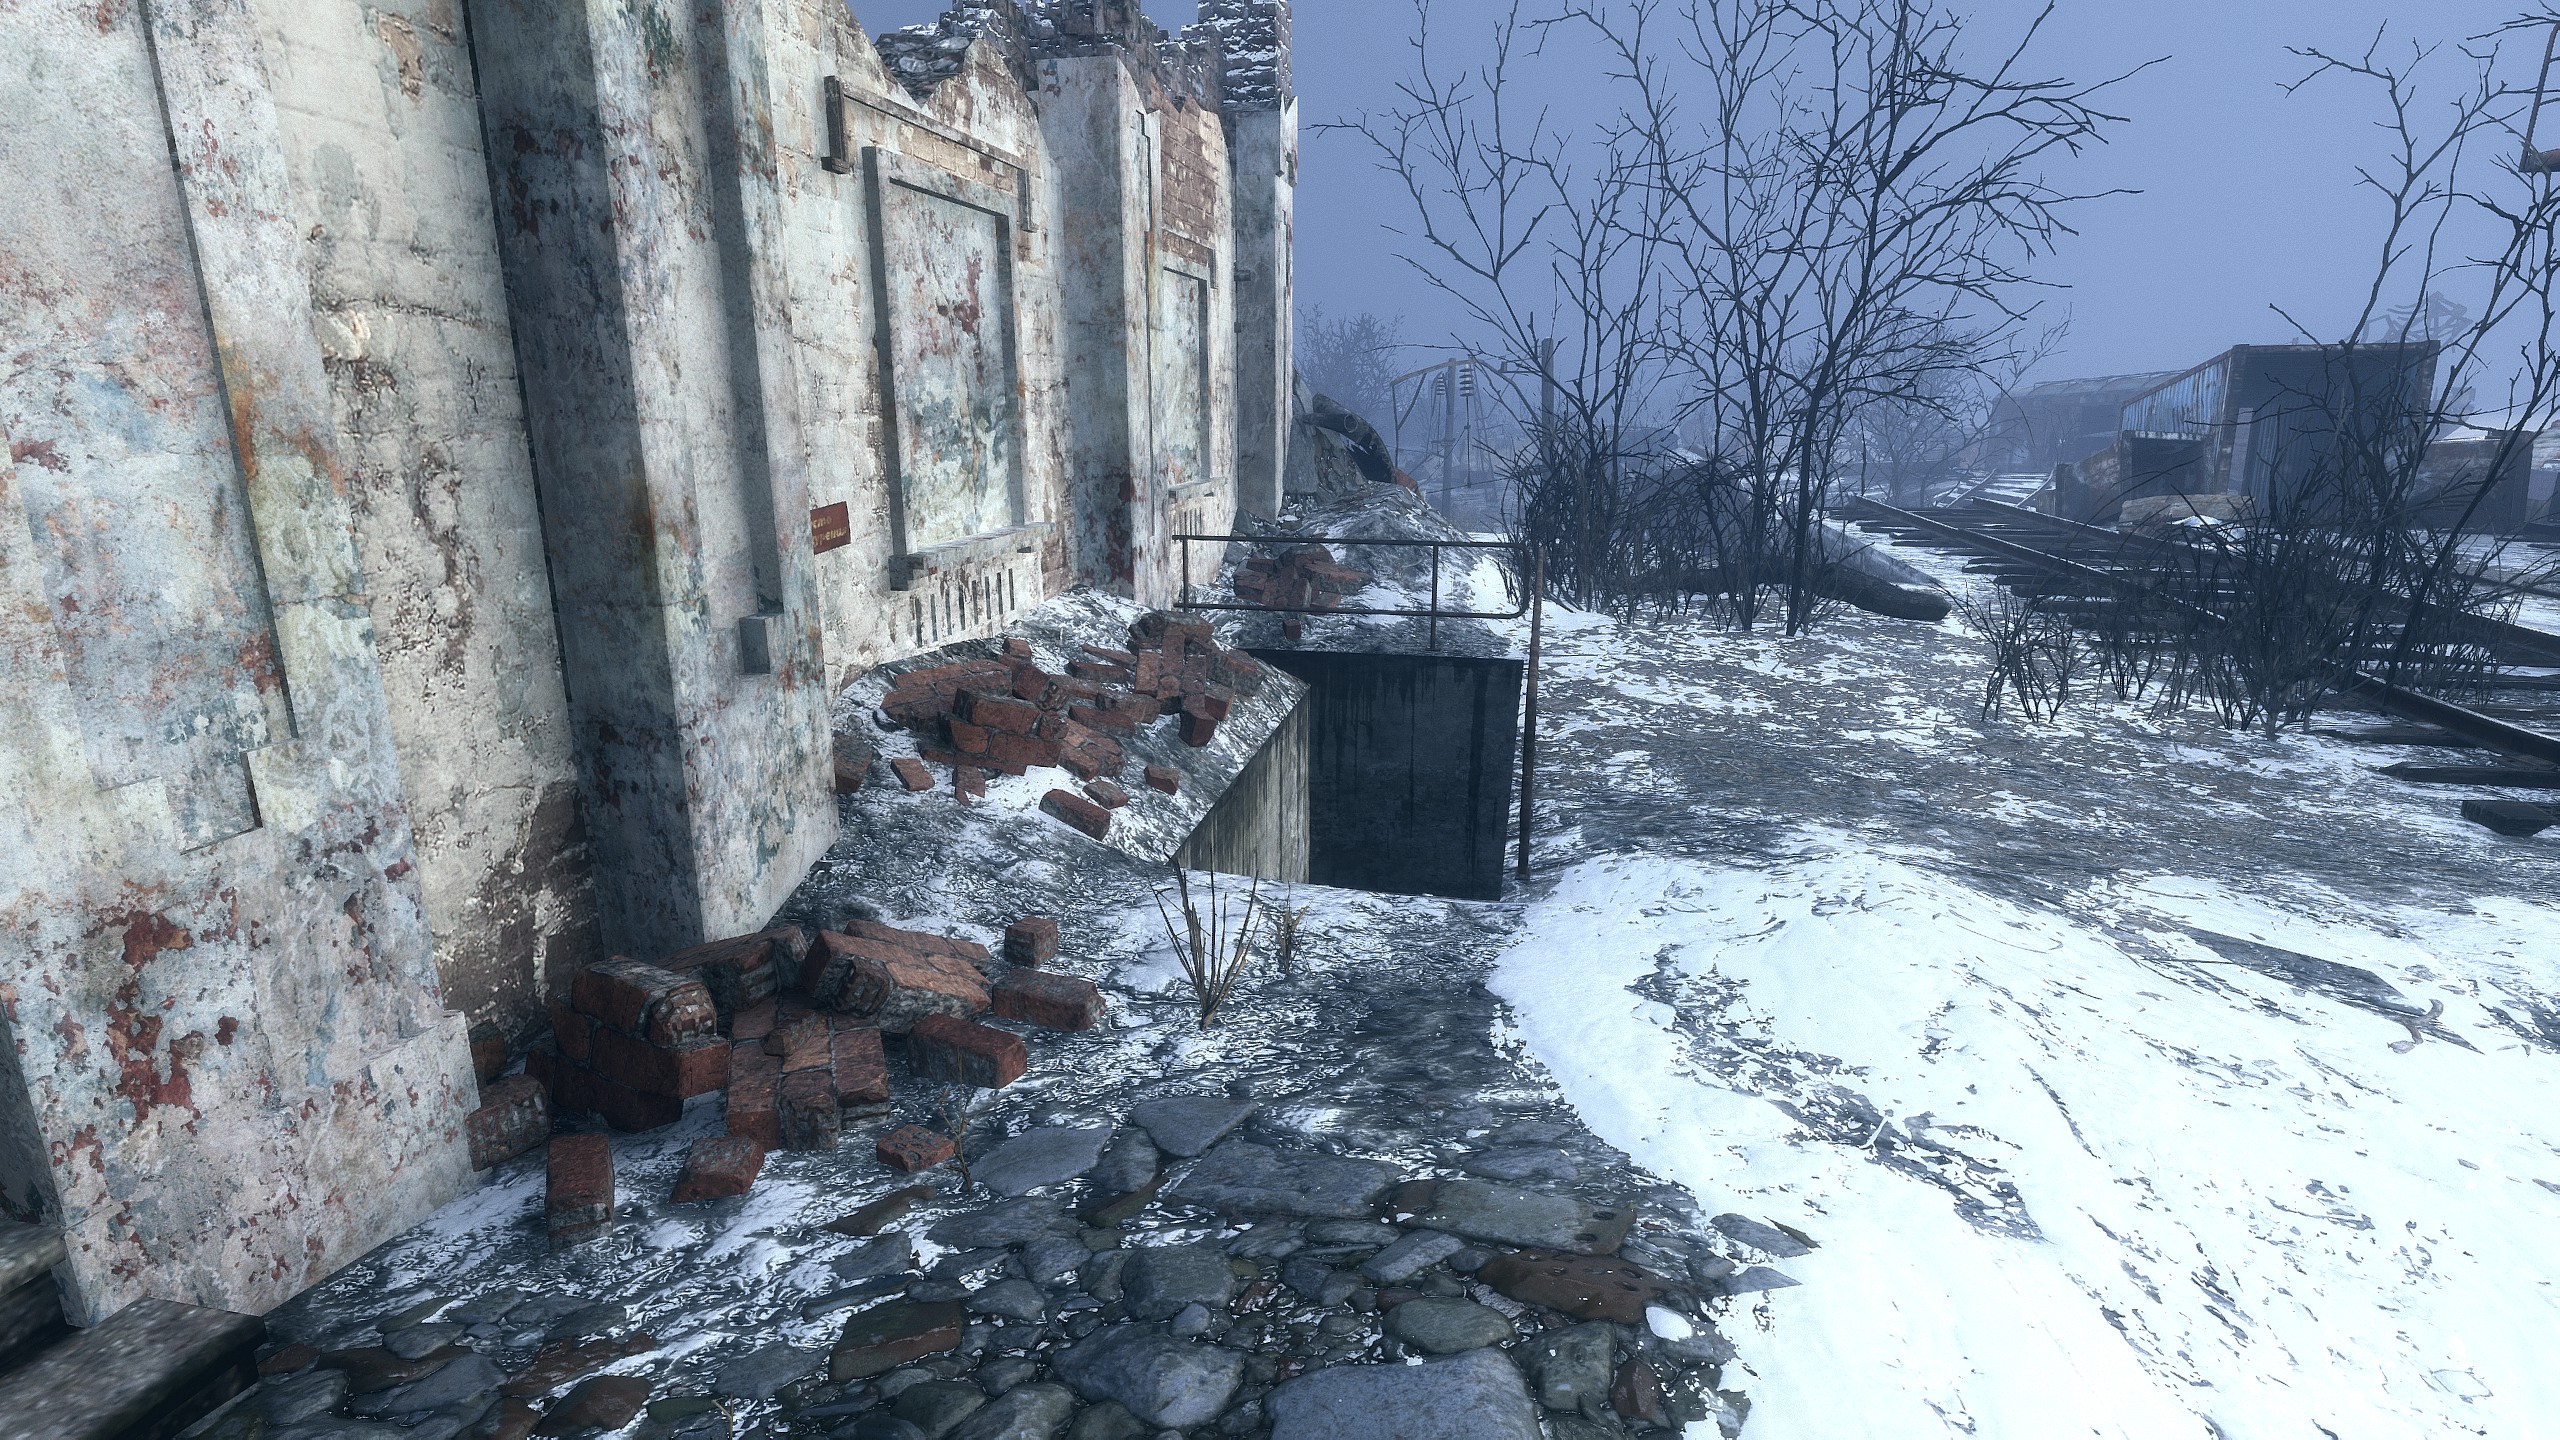 Metro Exodus All Collectibles - Upgrades - Achievements and Morality - a Comprehensive Guide (DLC'S INCLUDED)